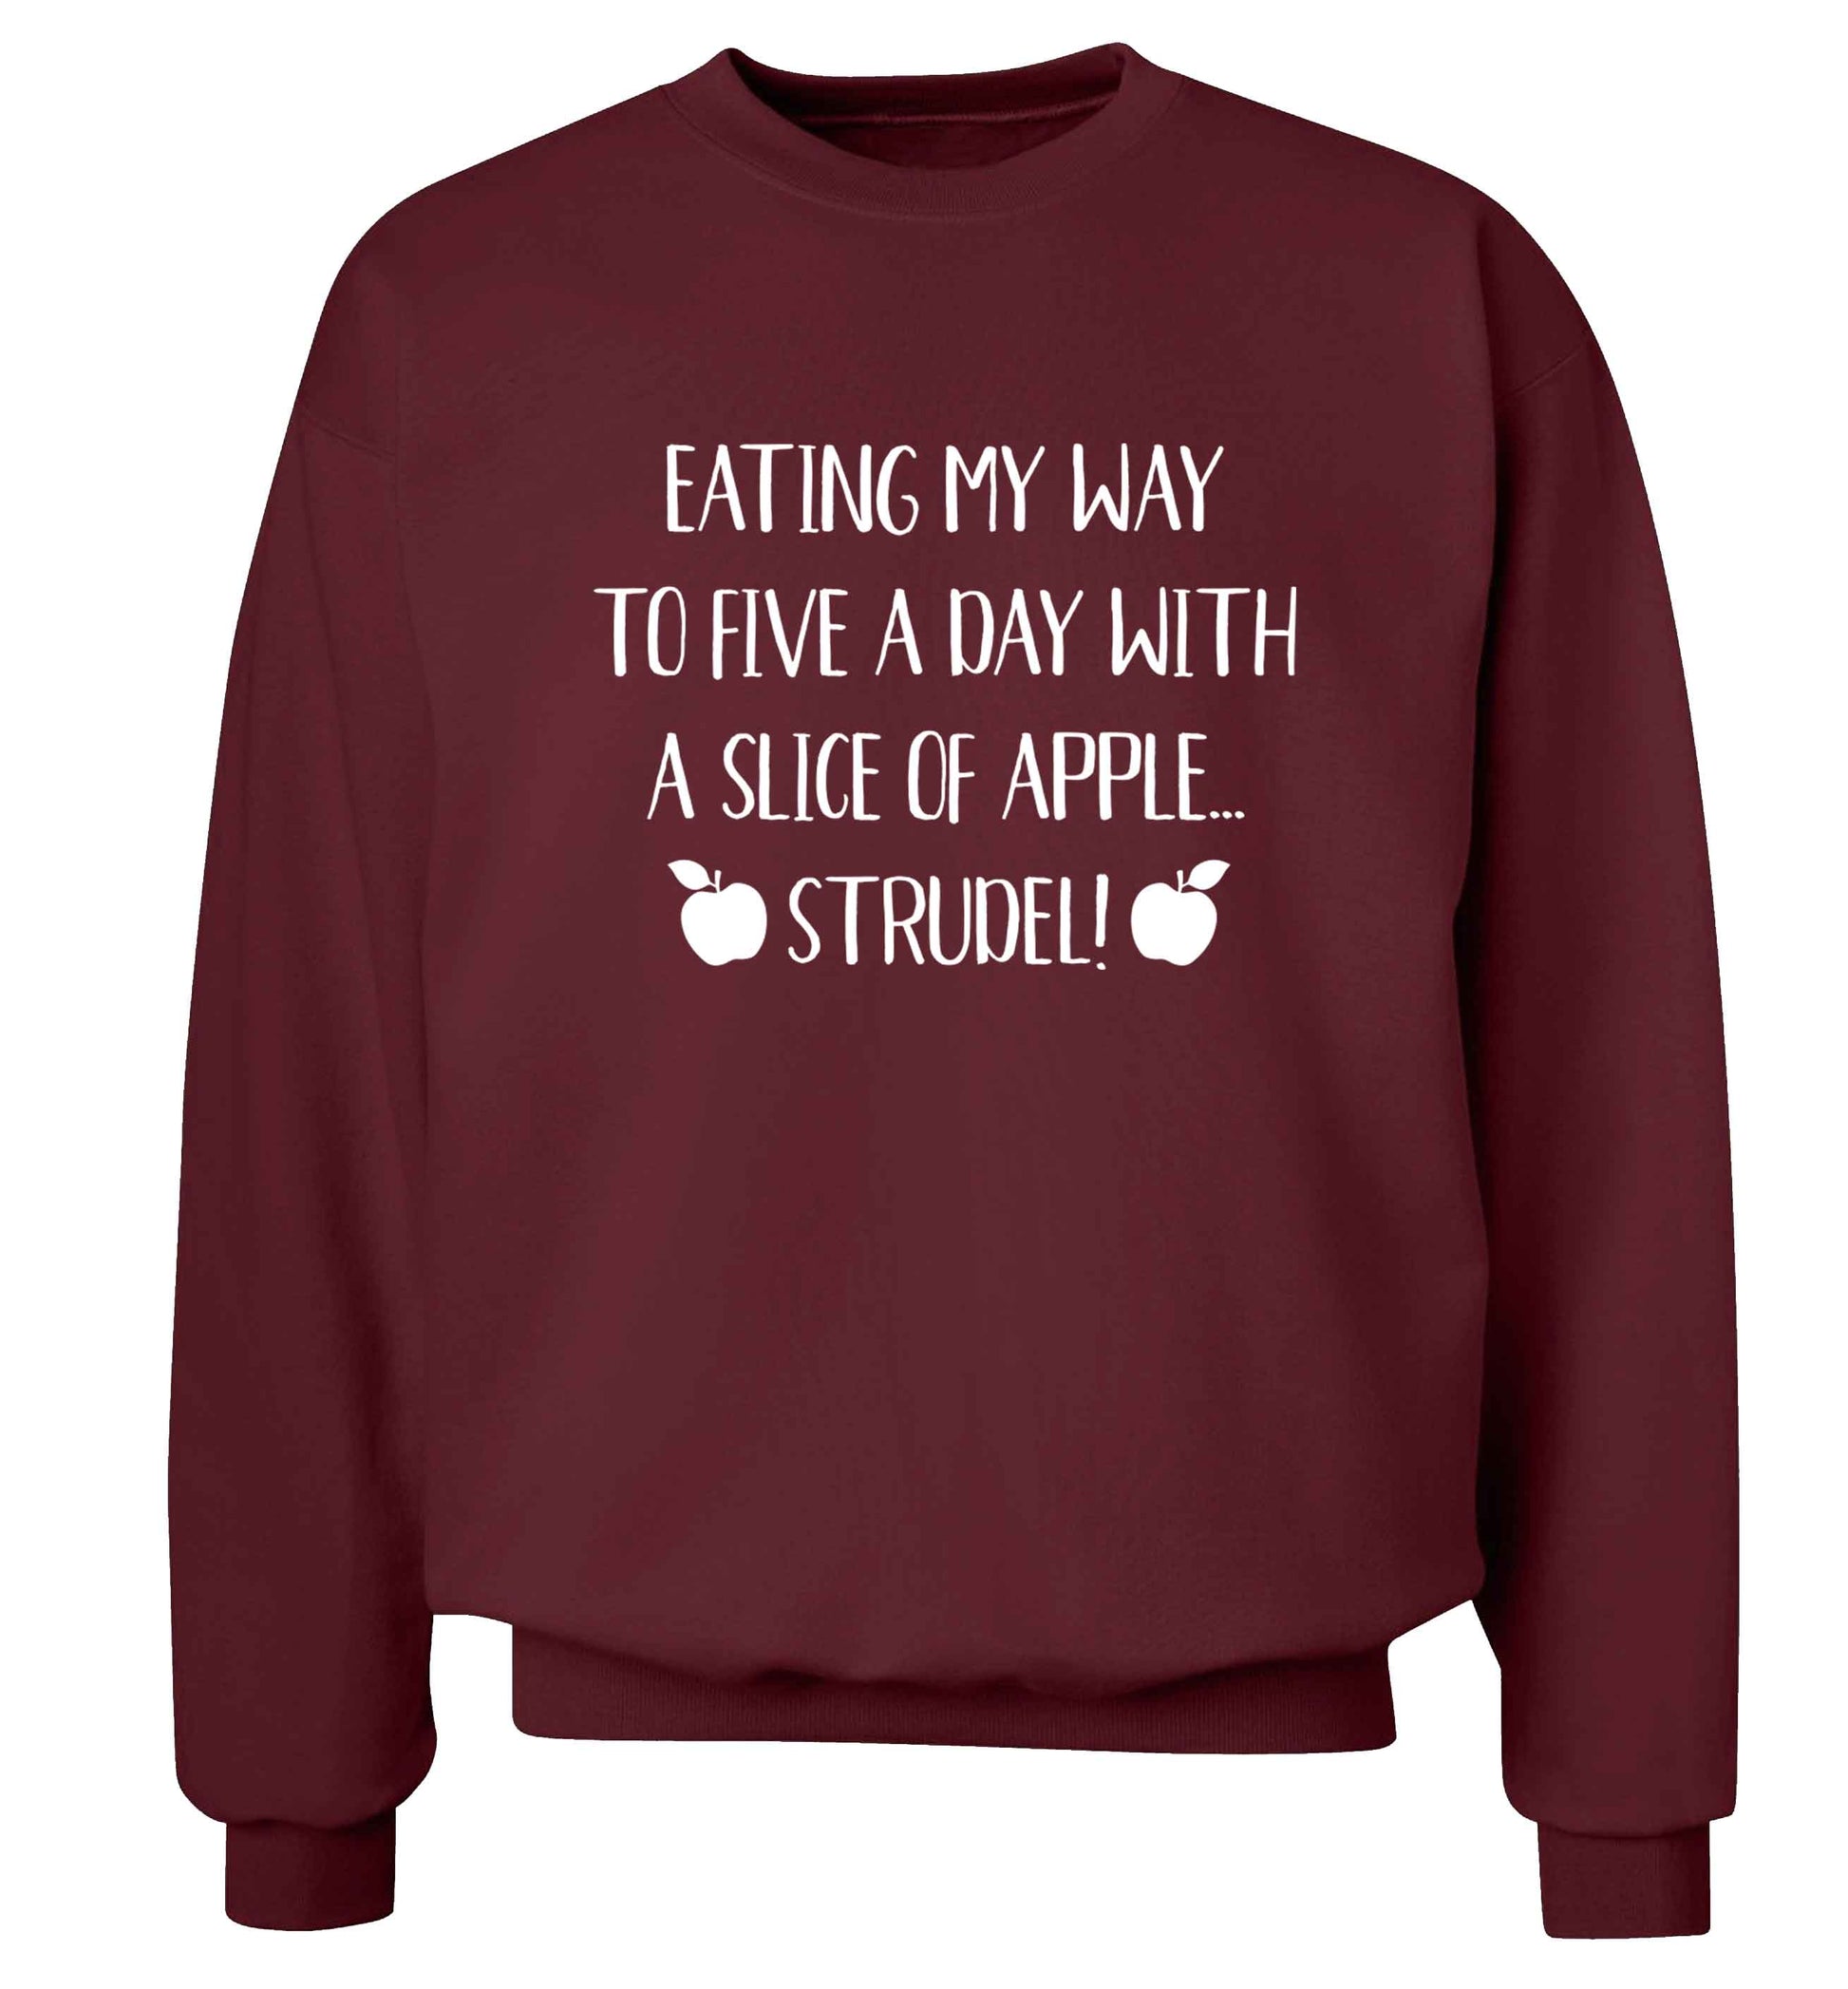 Eating my way to five a day with a slice of apple strudel Adult's unisex maroon Sweater 2XL